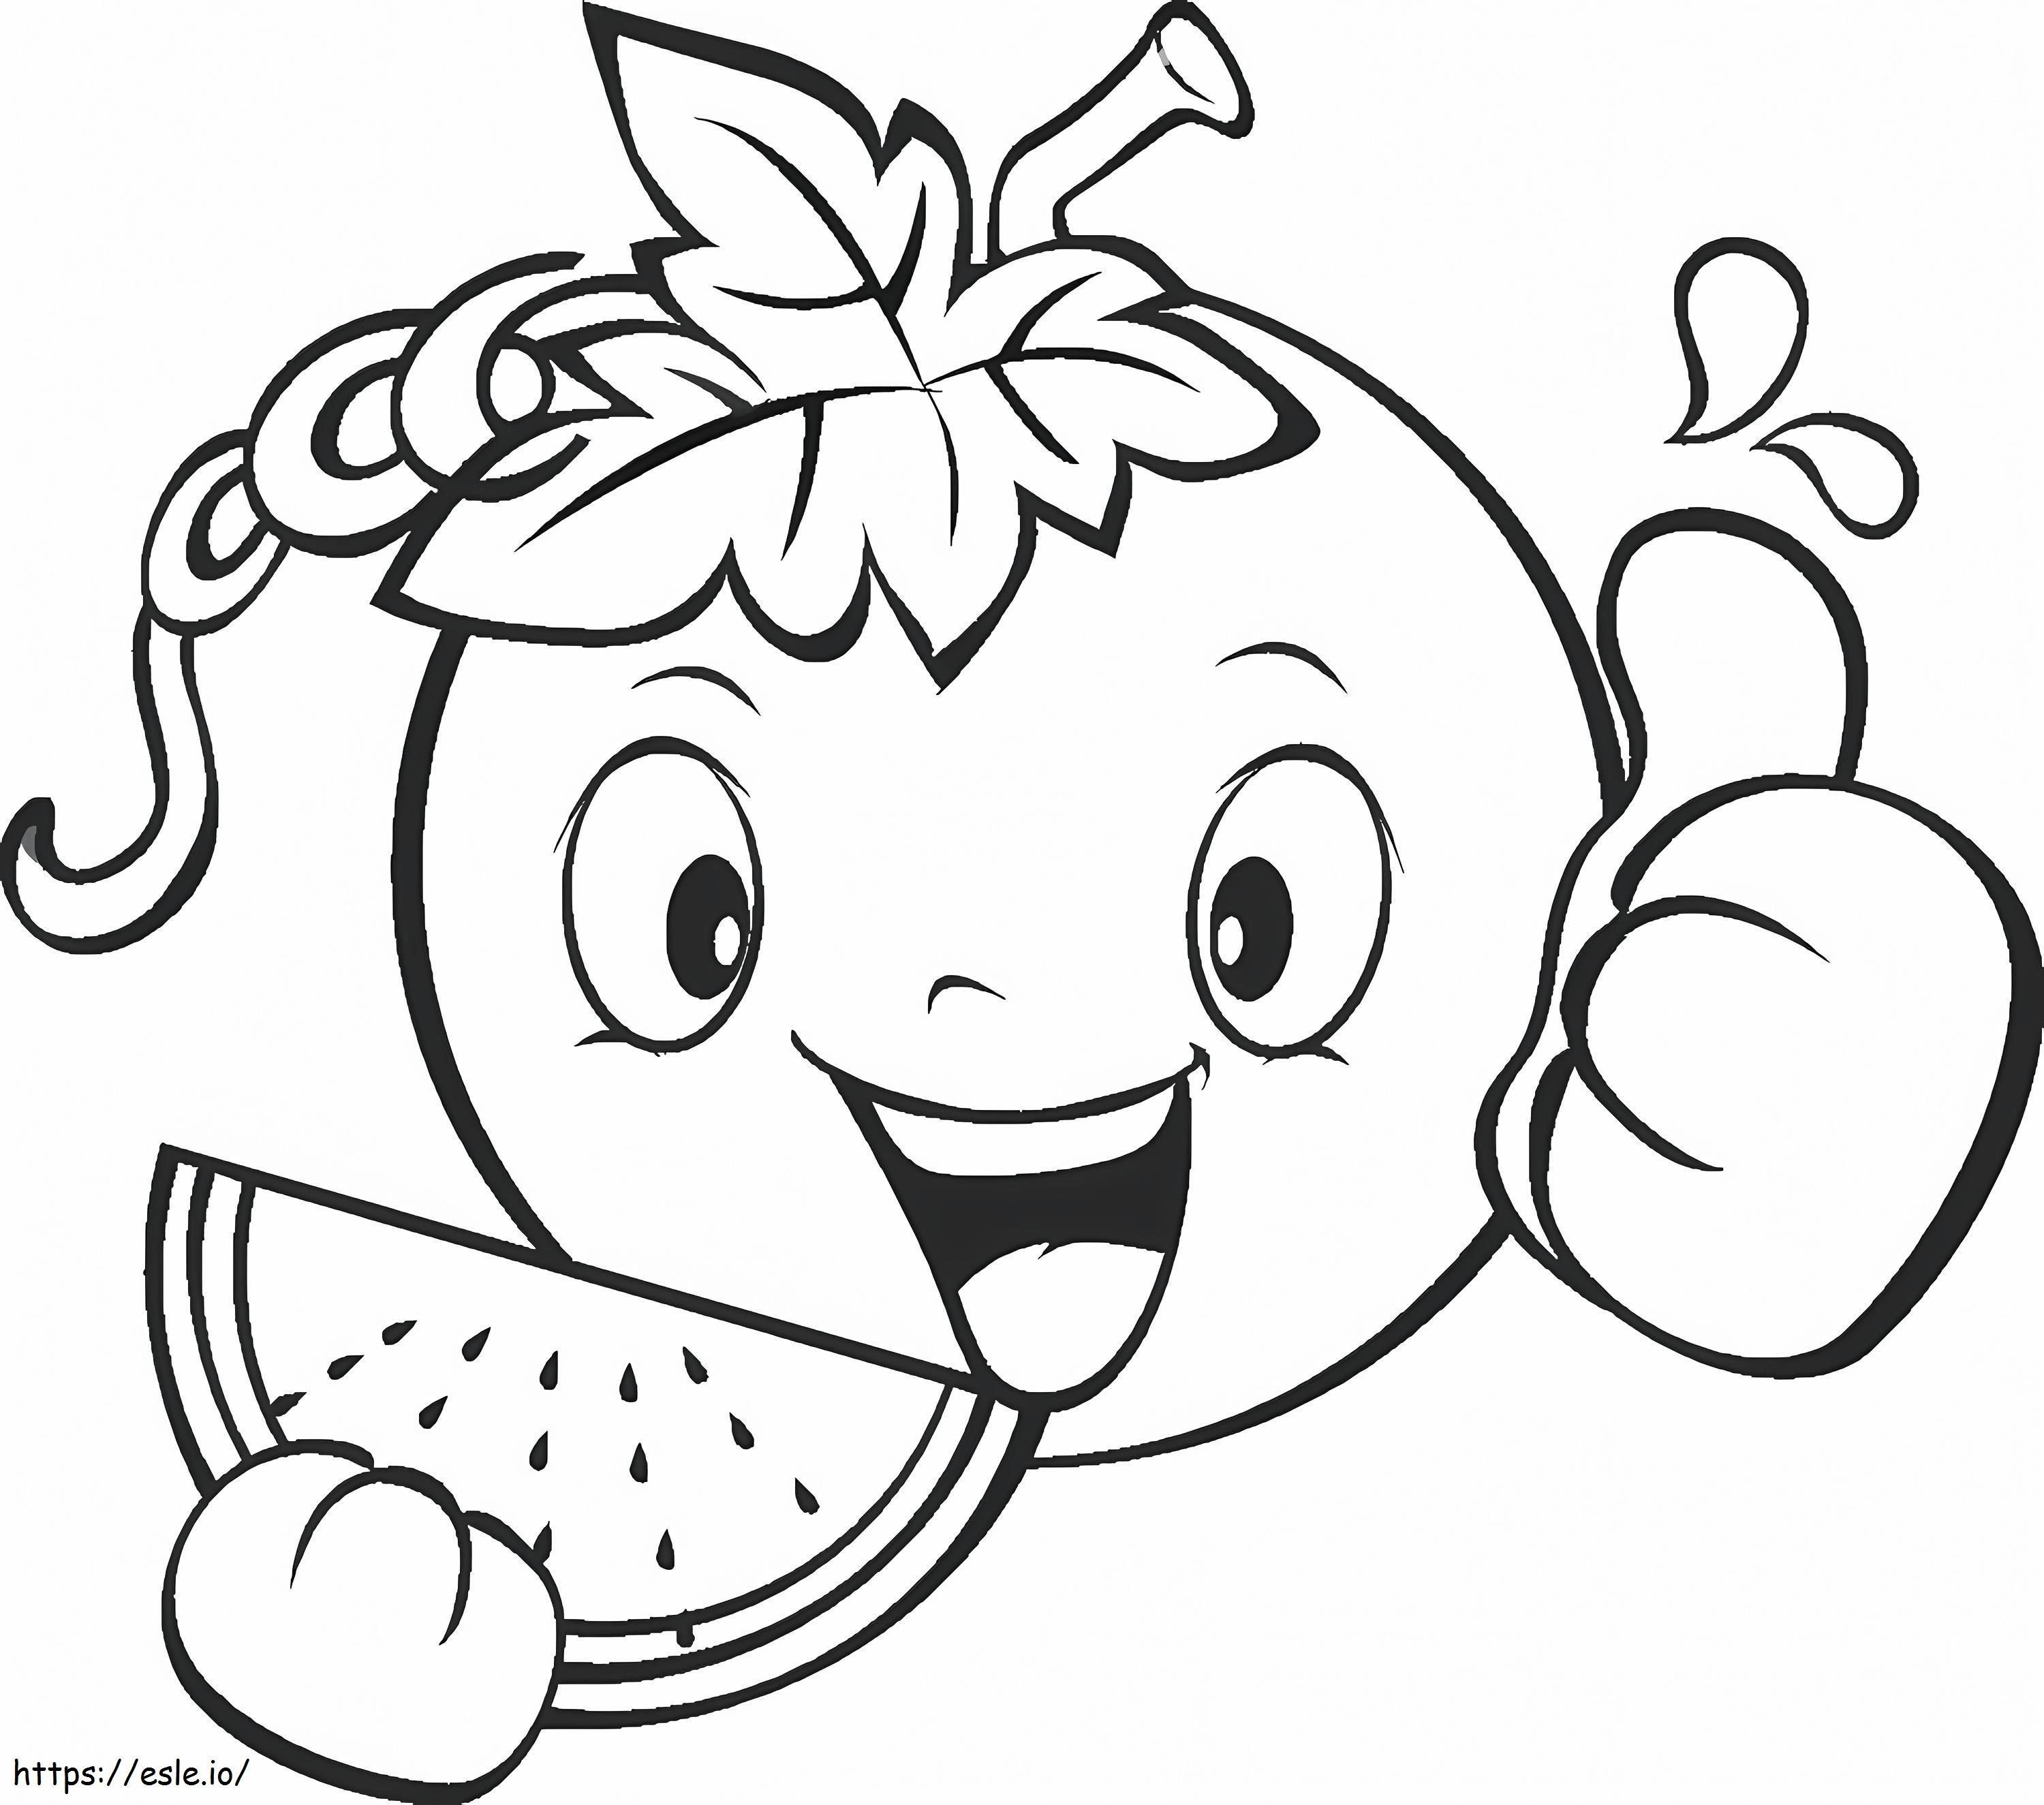 1543626316 Fruit And Vegetable 11 coloring page